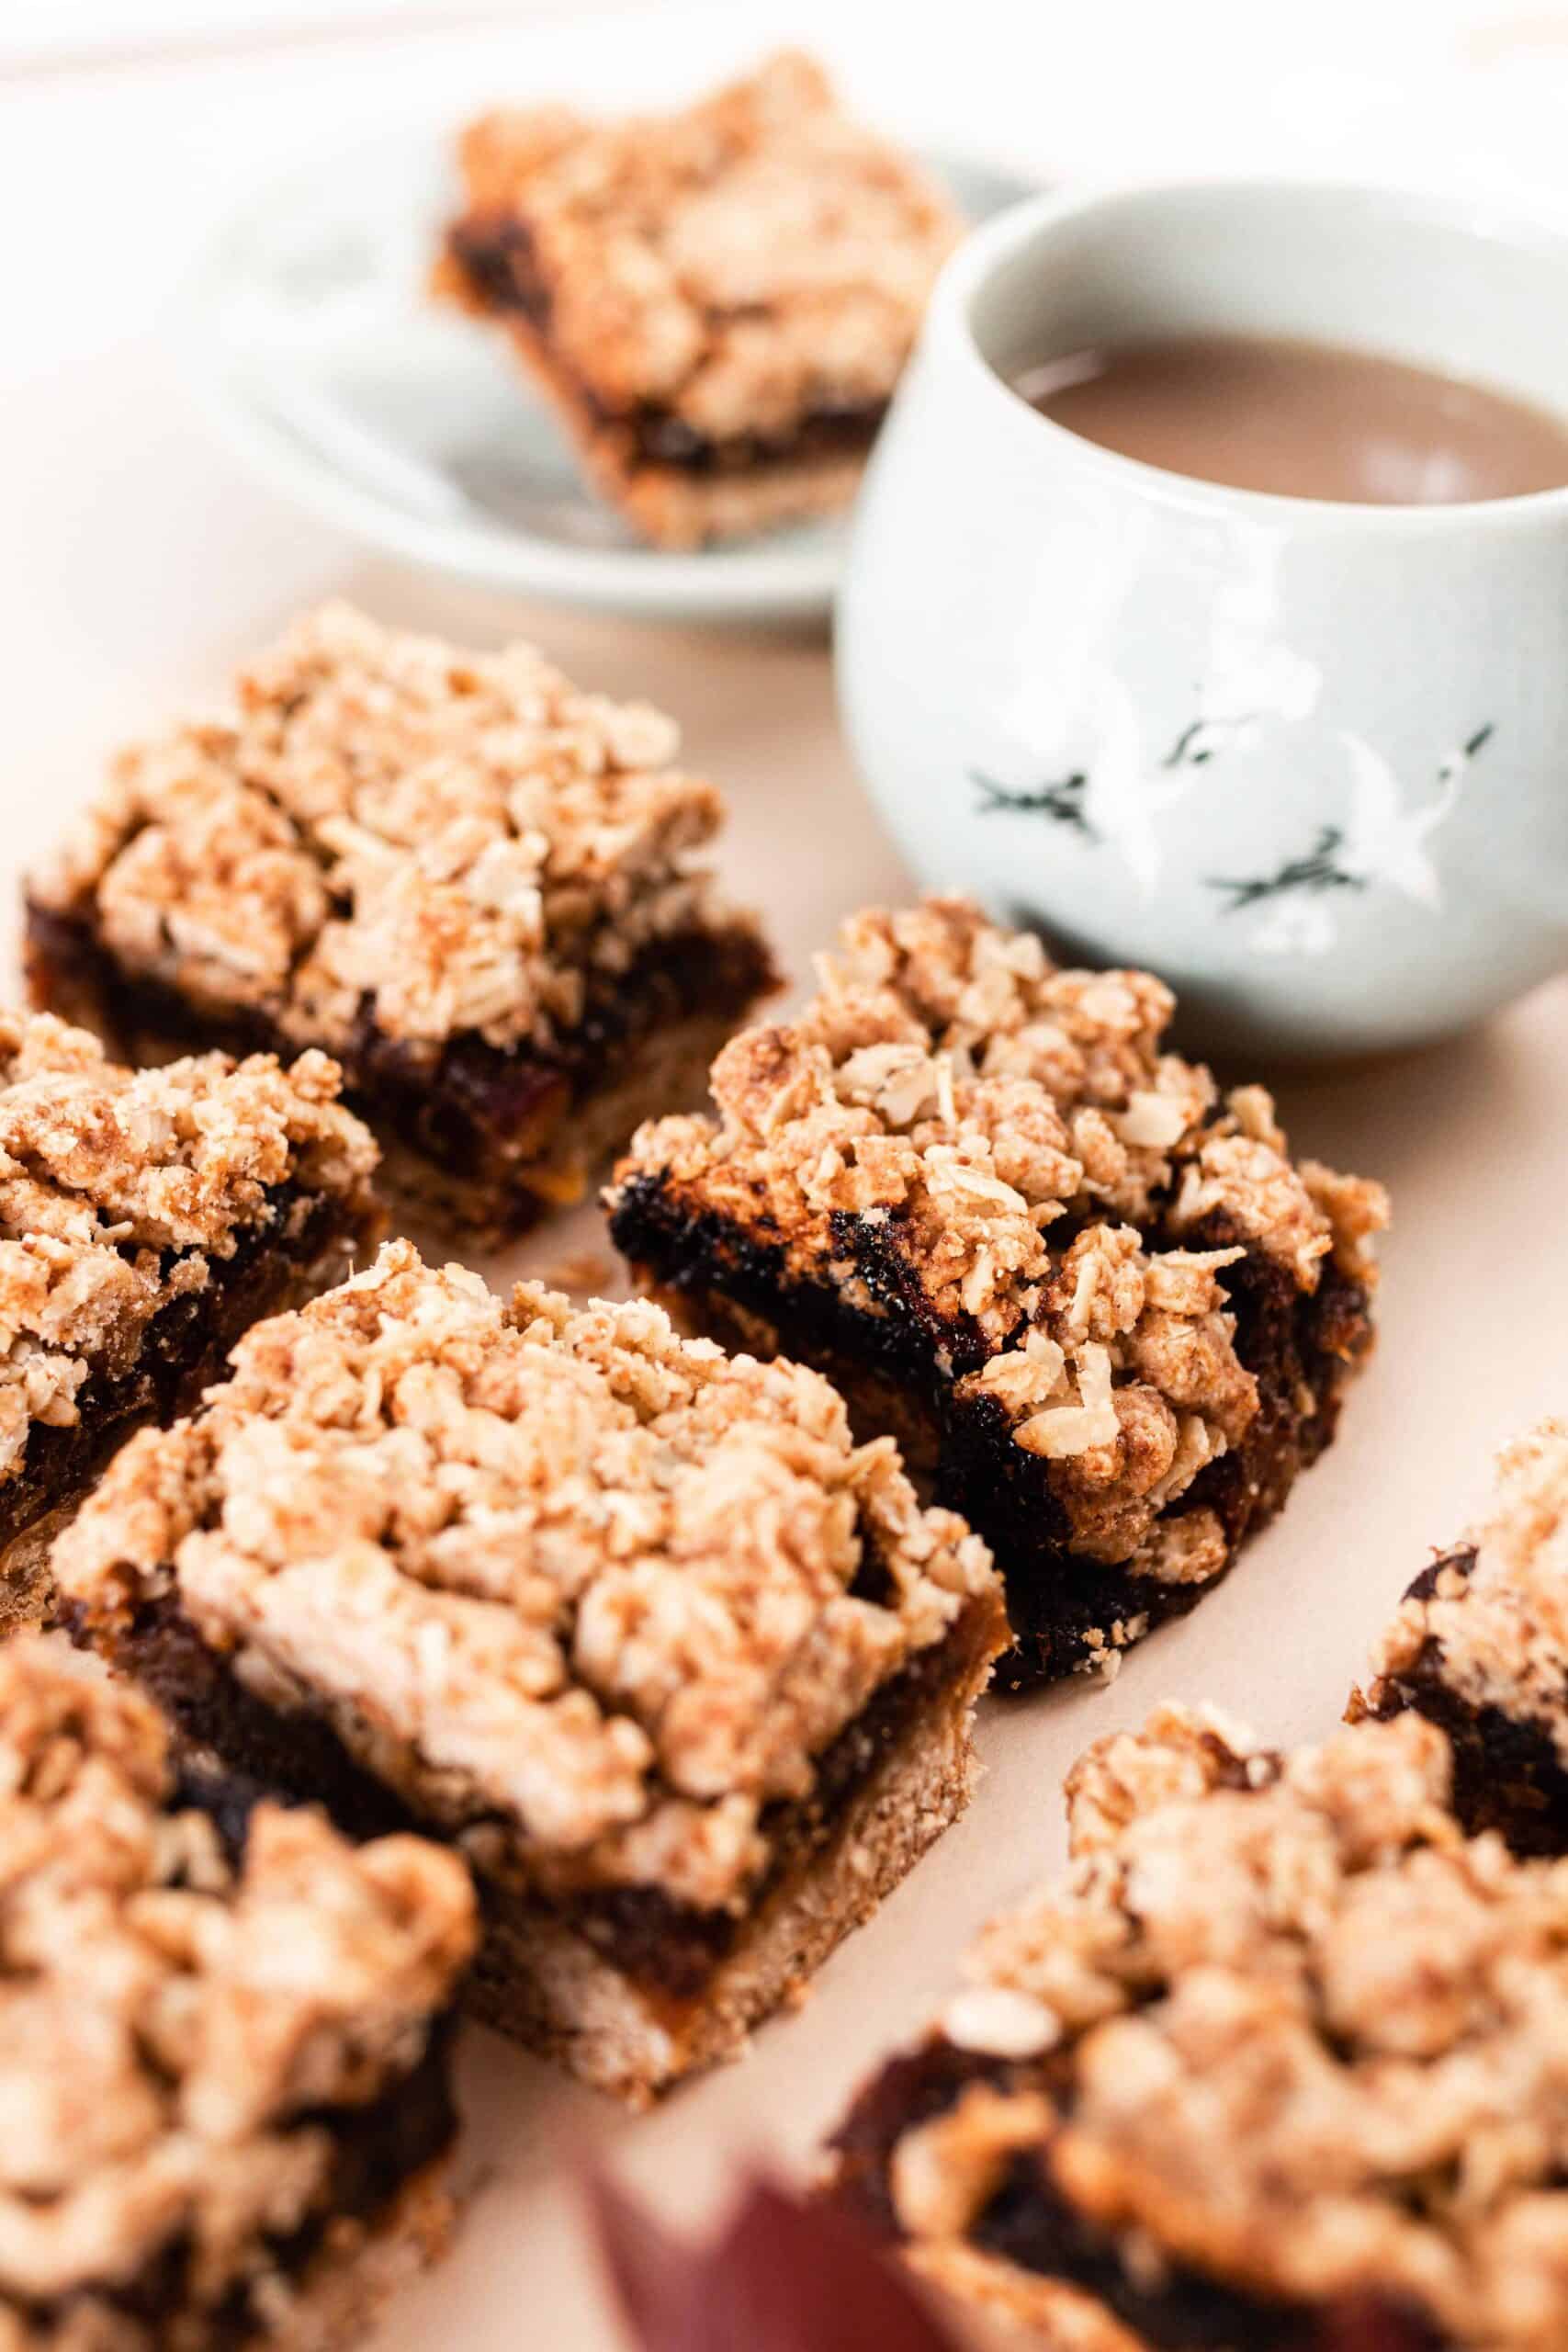 date squares on parchment paper with a mug of coffee behind